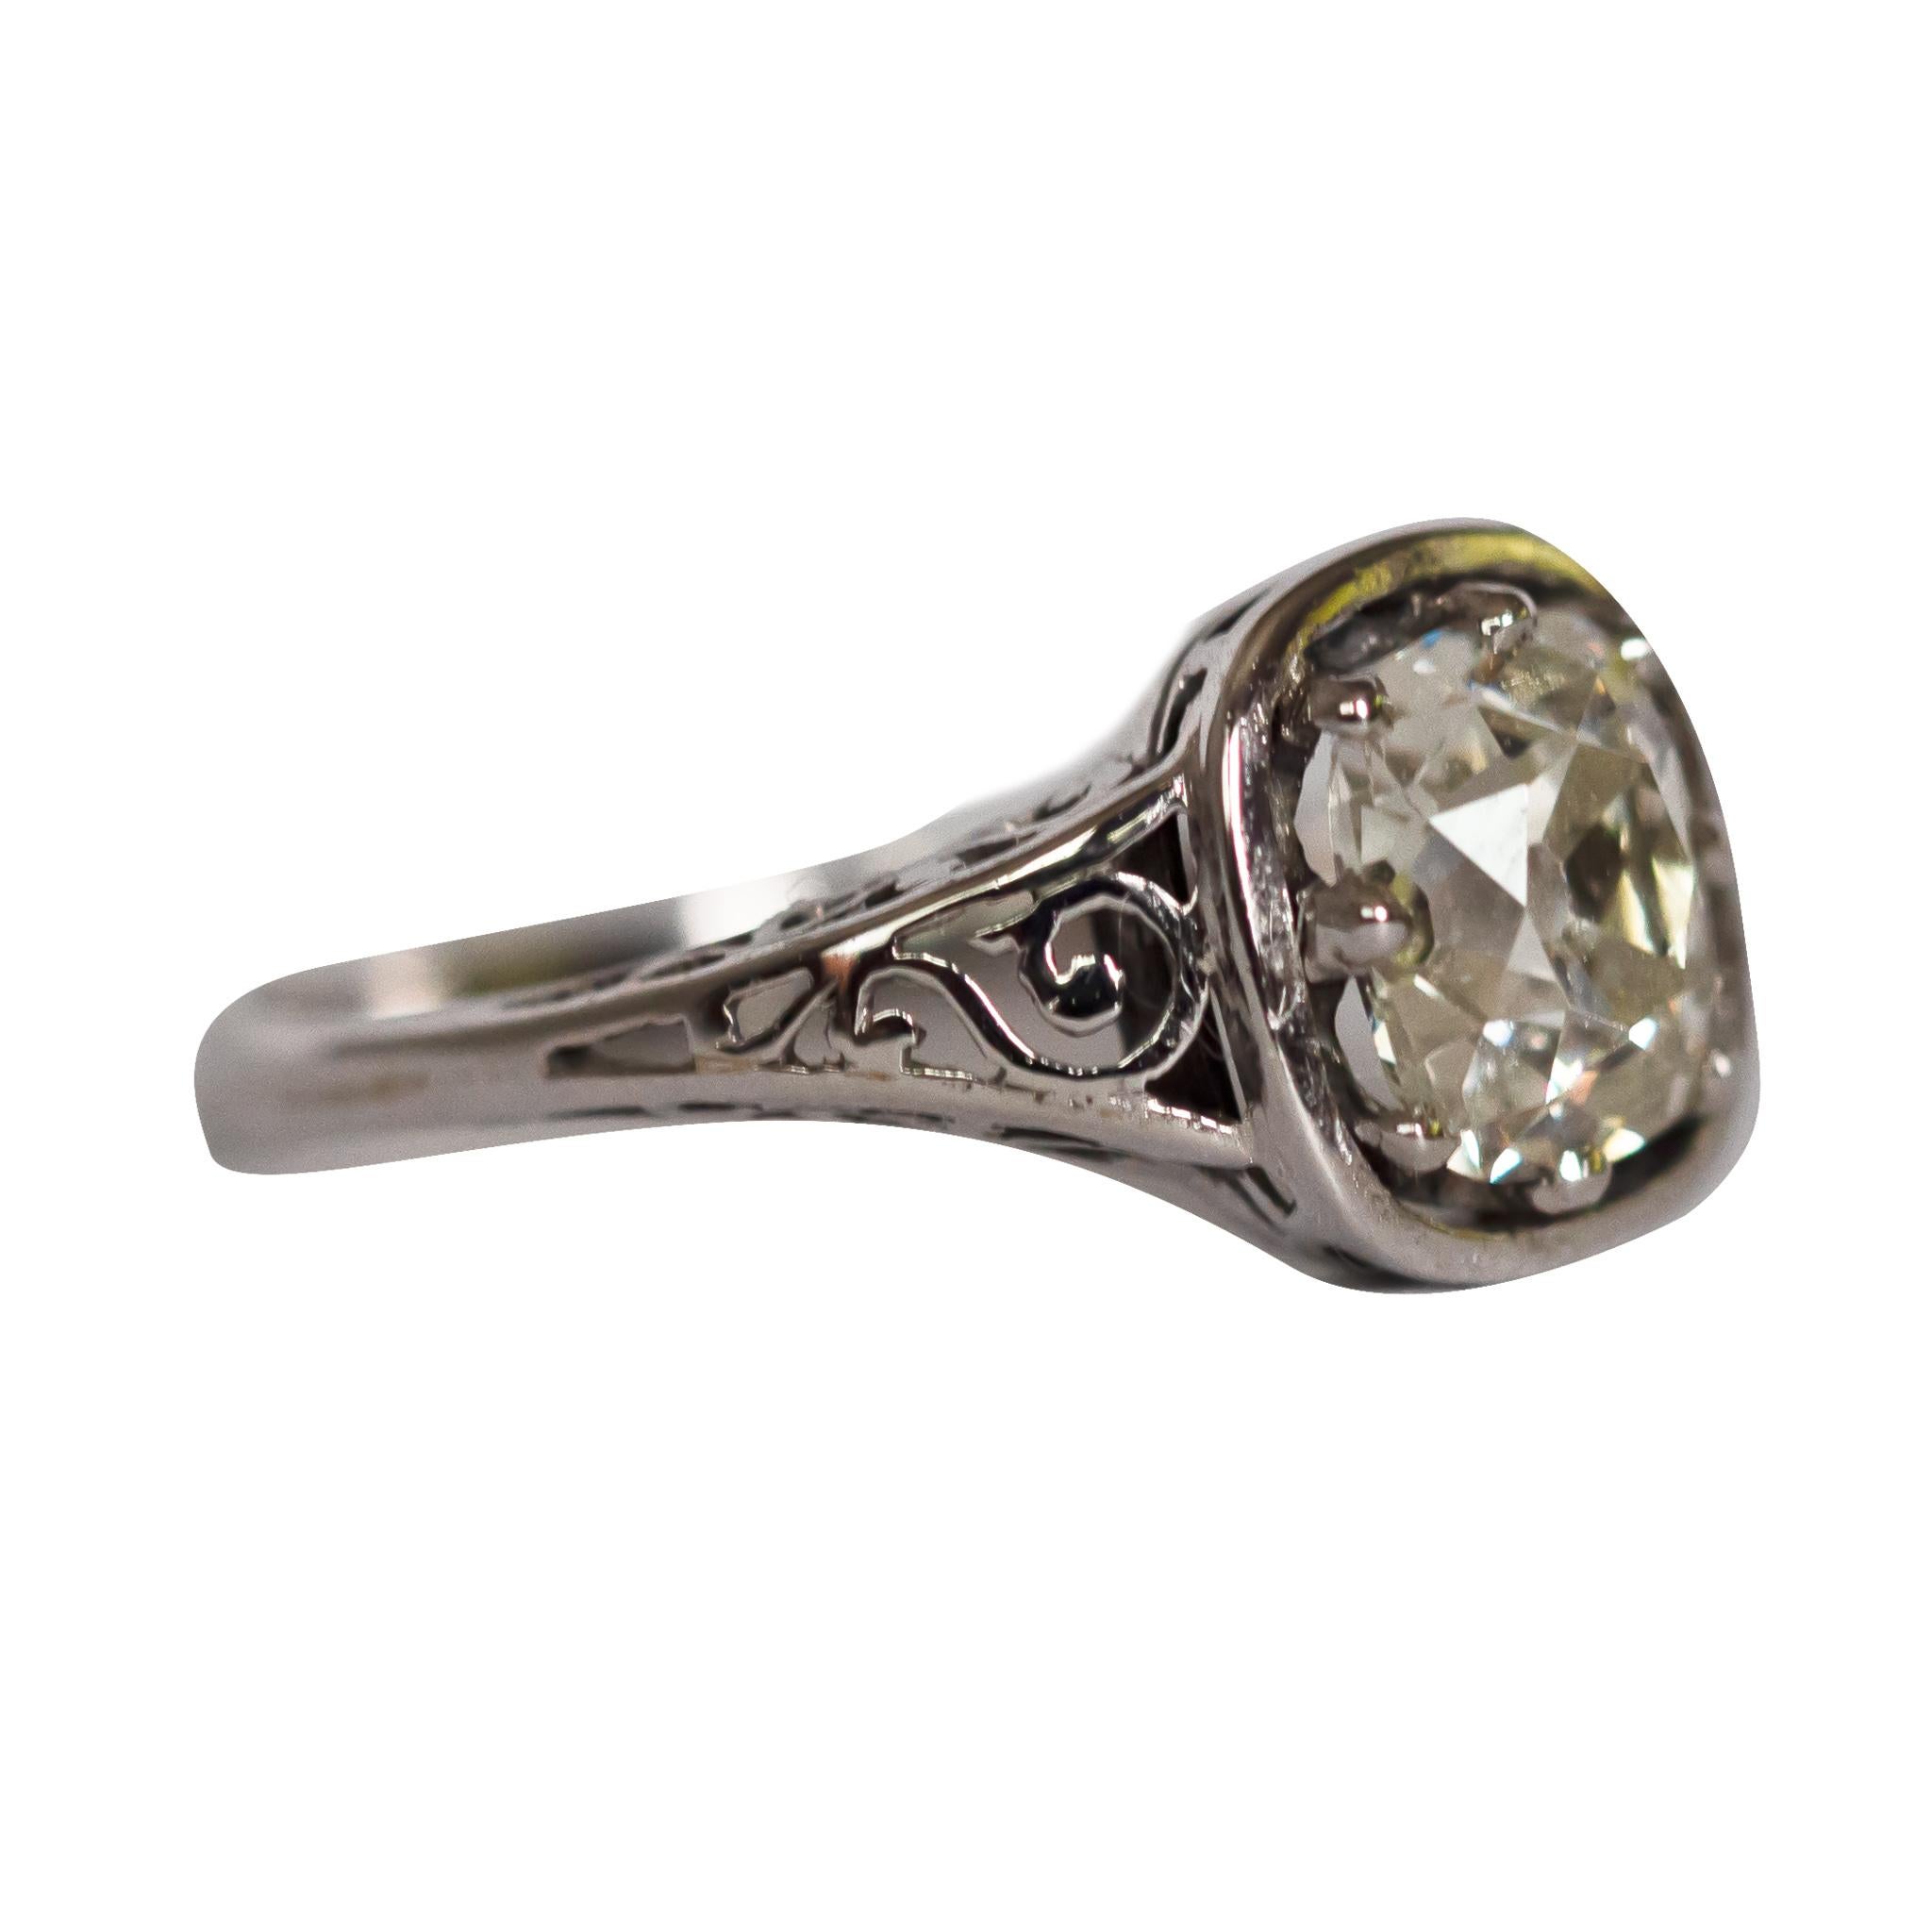 Ring Size: 7.75
Metal Type: 14k White Gold [Hallmarked, and Tested]
Weight:  2.5  grams

Center Diamond Details:
Weight: 1.37 carat
Cut: Old Mine / Antique Cushion 
Color: K-L
Clarity: VS1

Finger to Top of Stone Measurement: 6mm
Condition:  Very